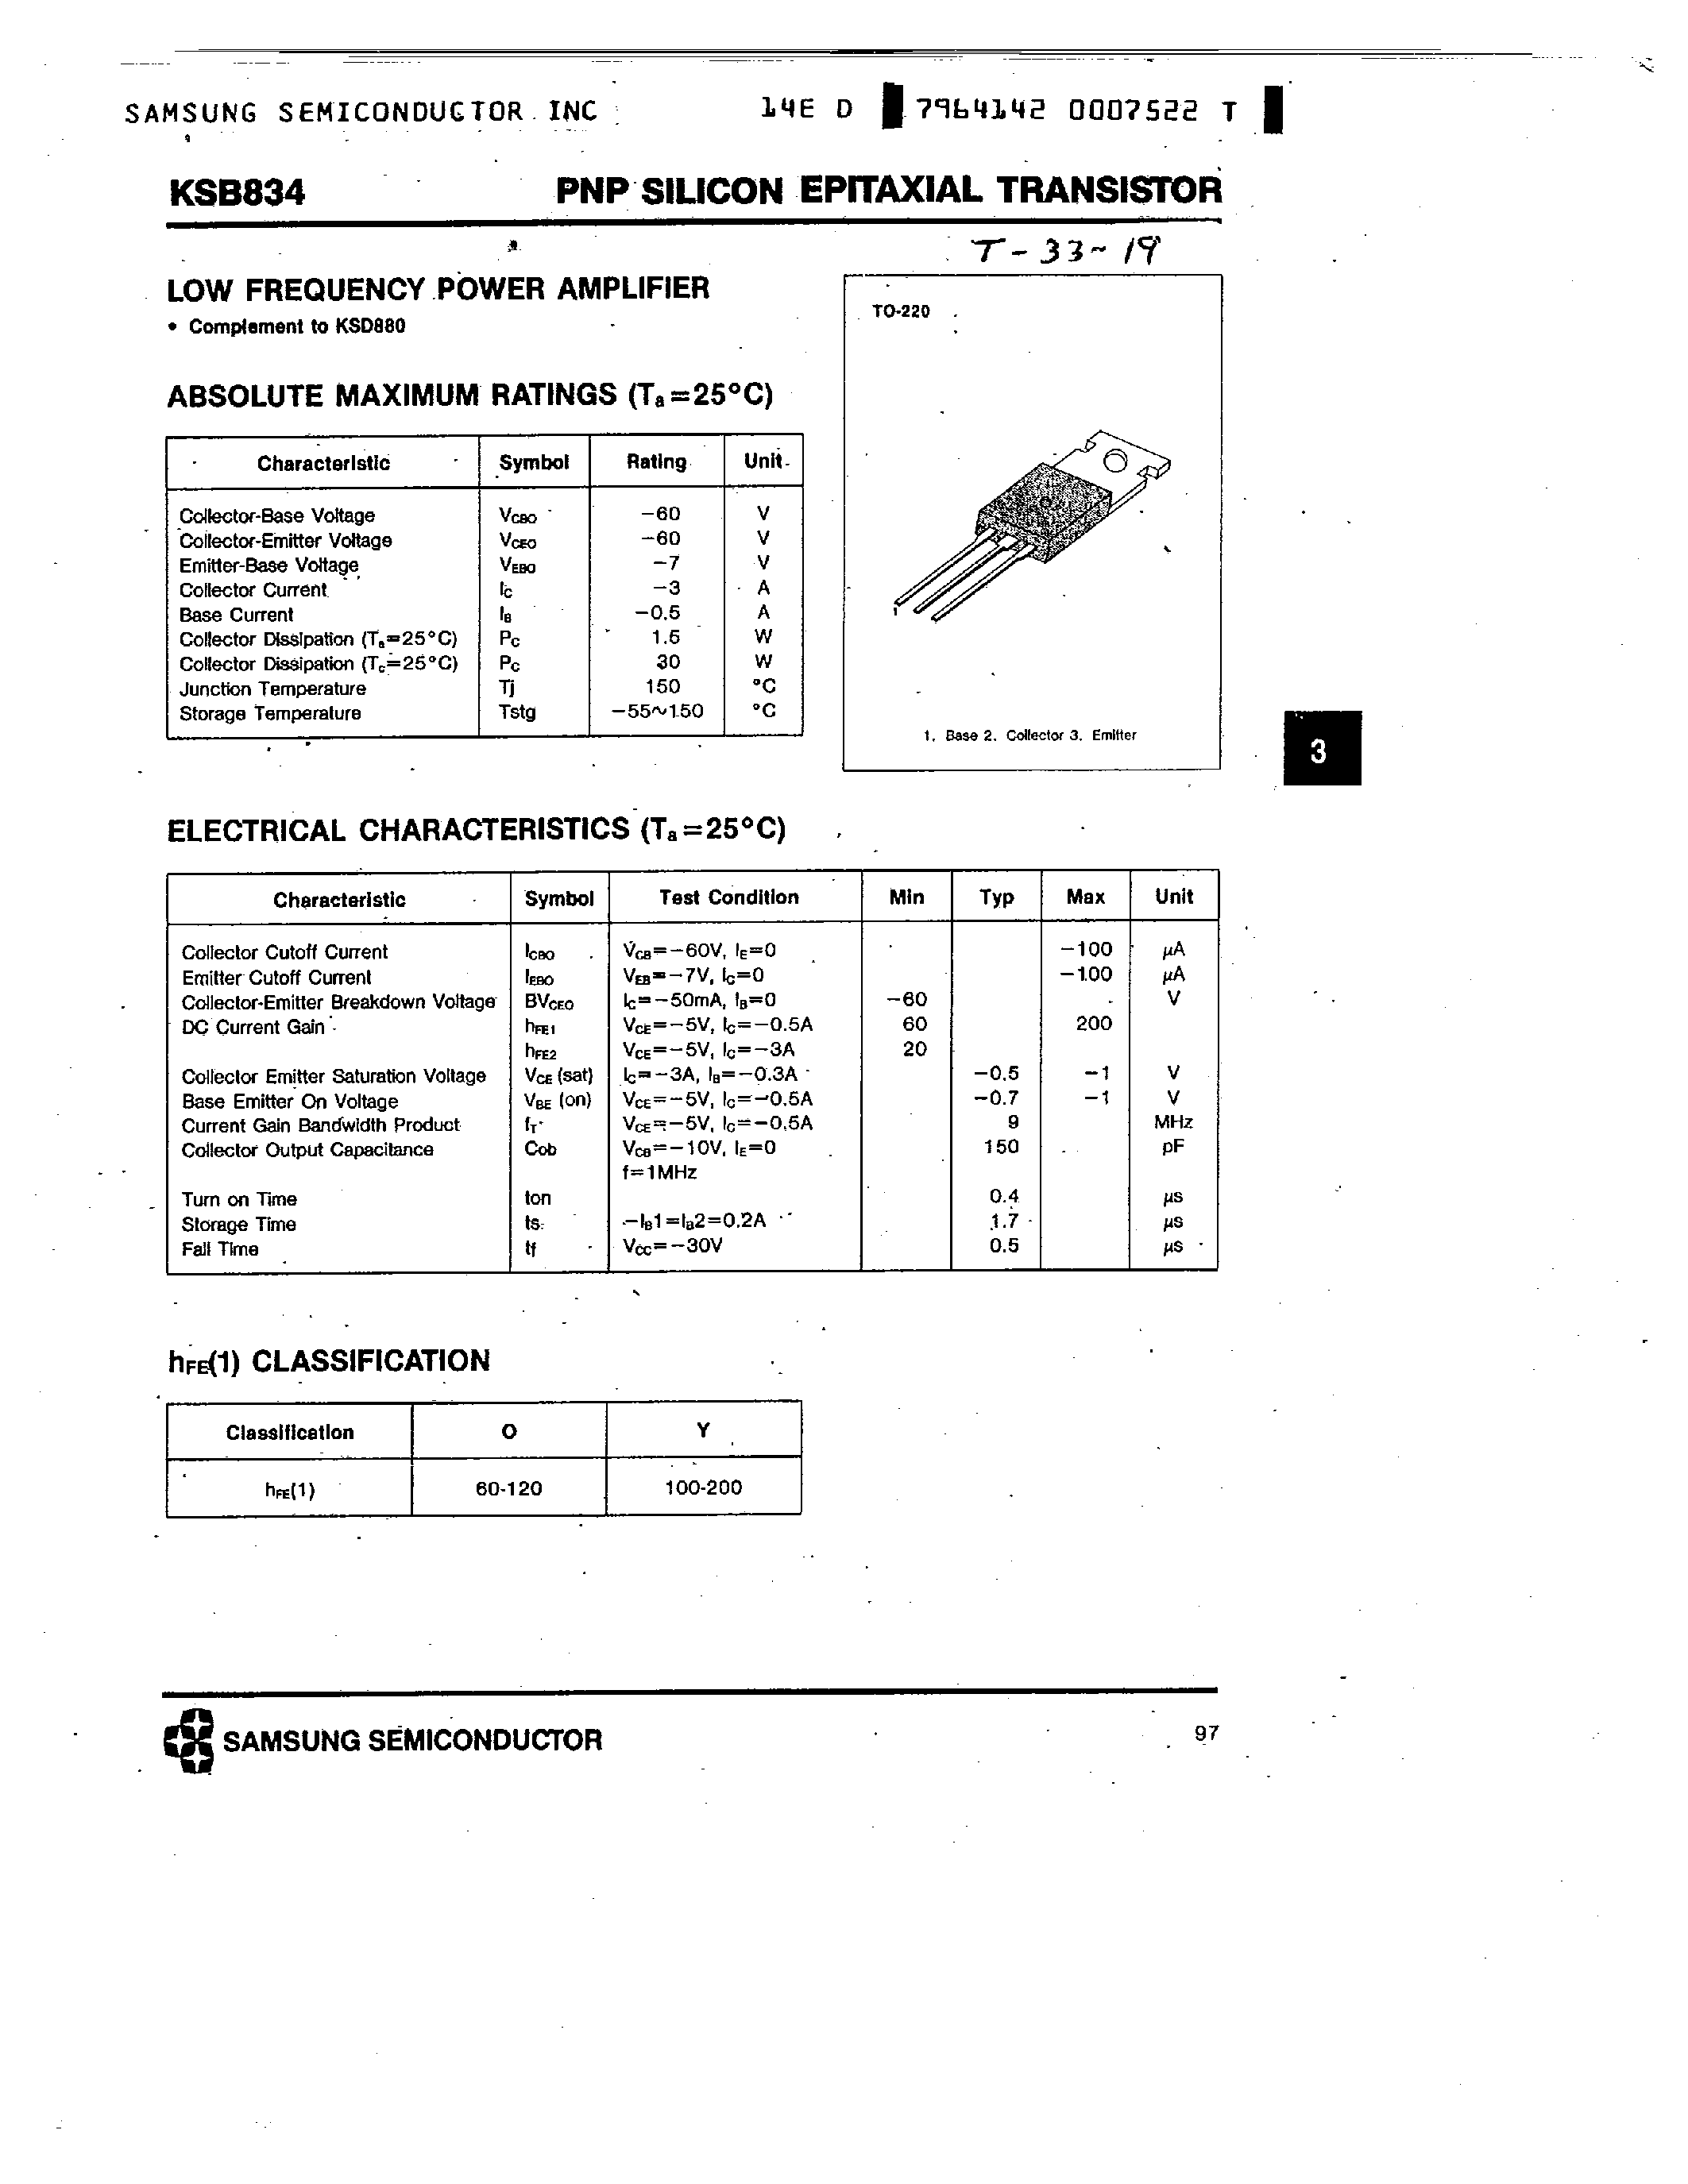 Datasheet KSB834 - PNP (LOW FREQUENCY POWER AMPLIFIER) page 1